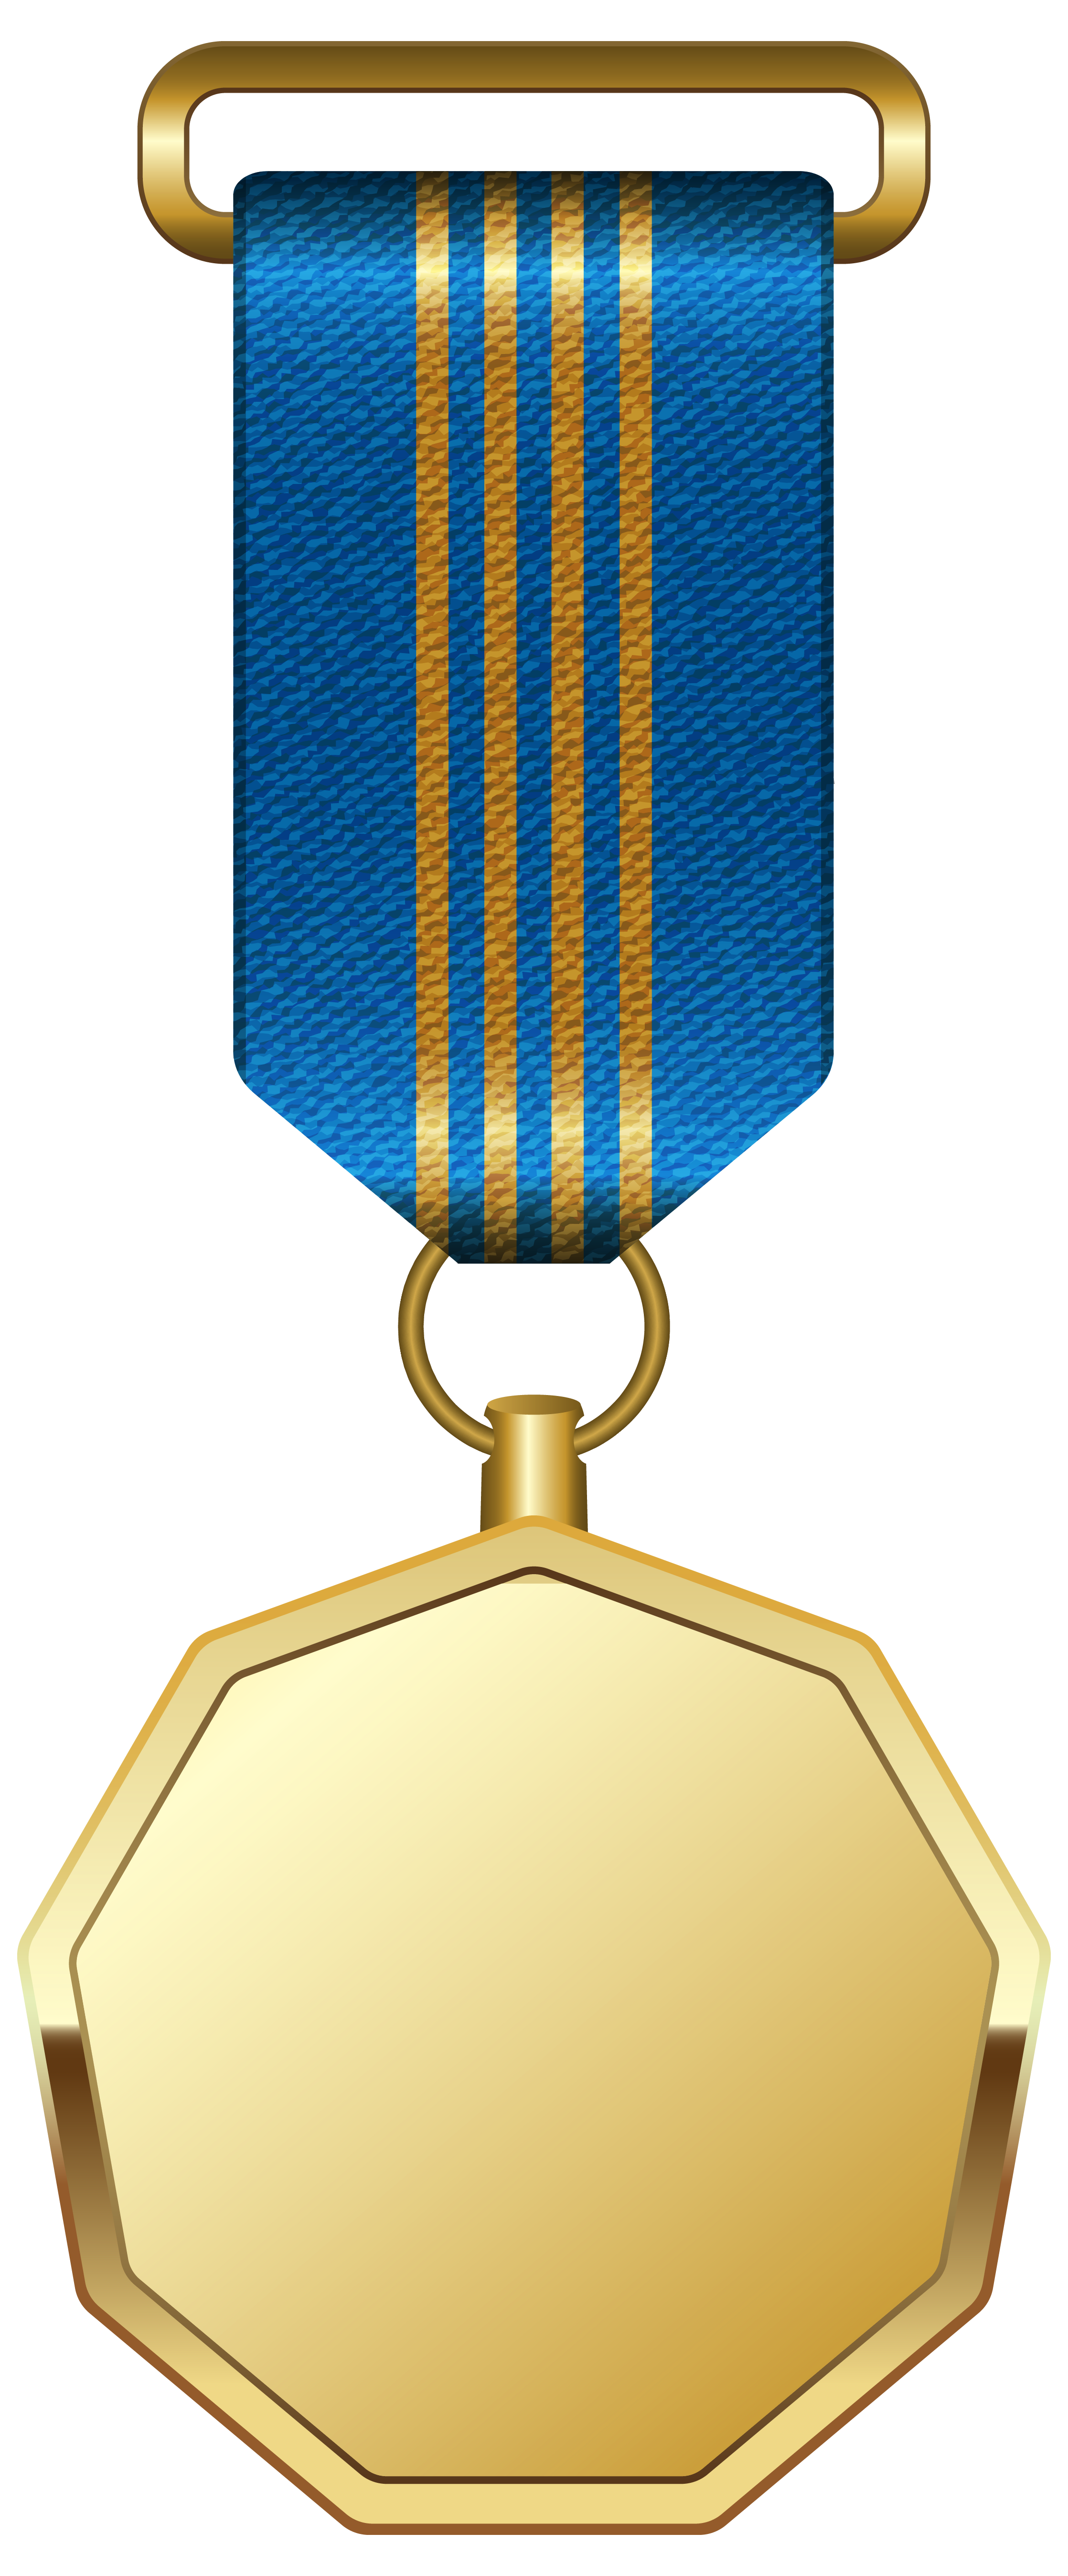 Podium clipart gold medal. With blue ribbon png